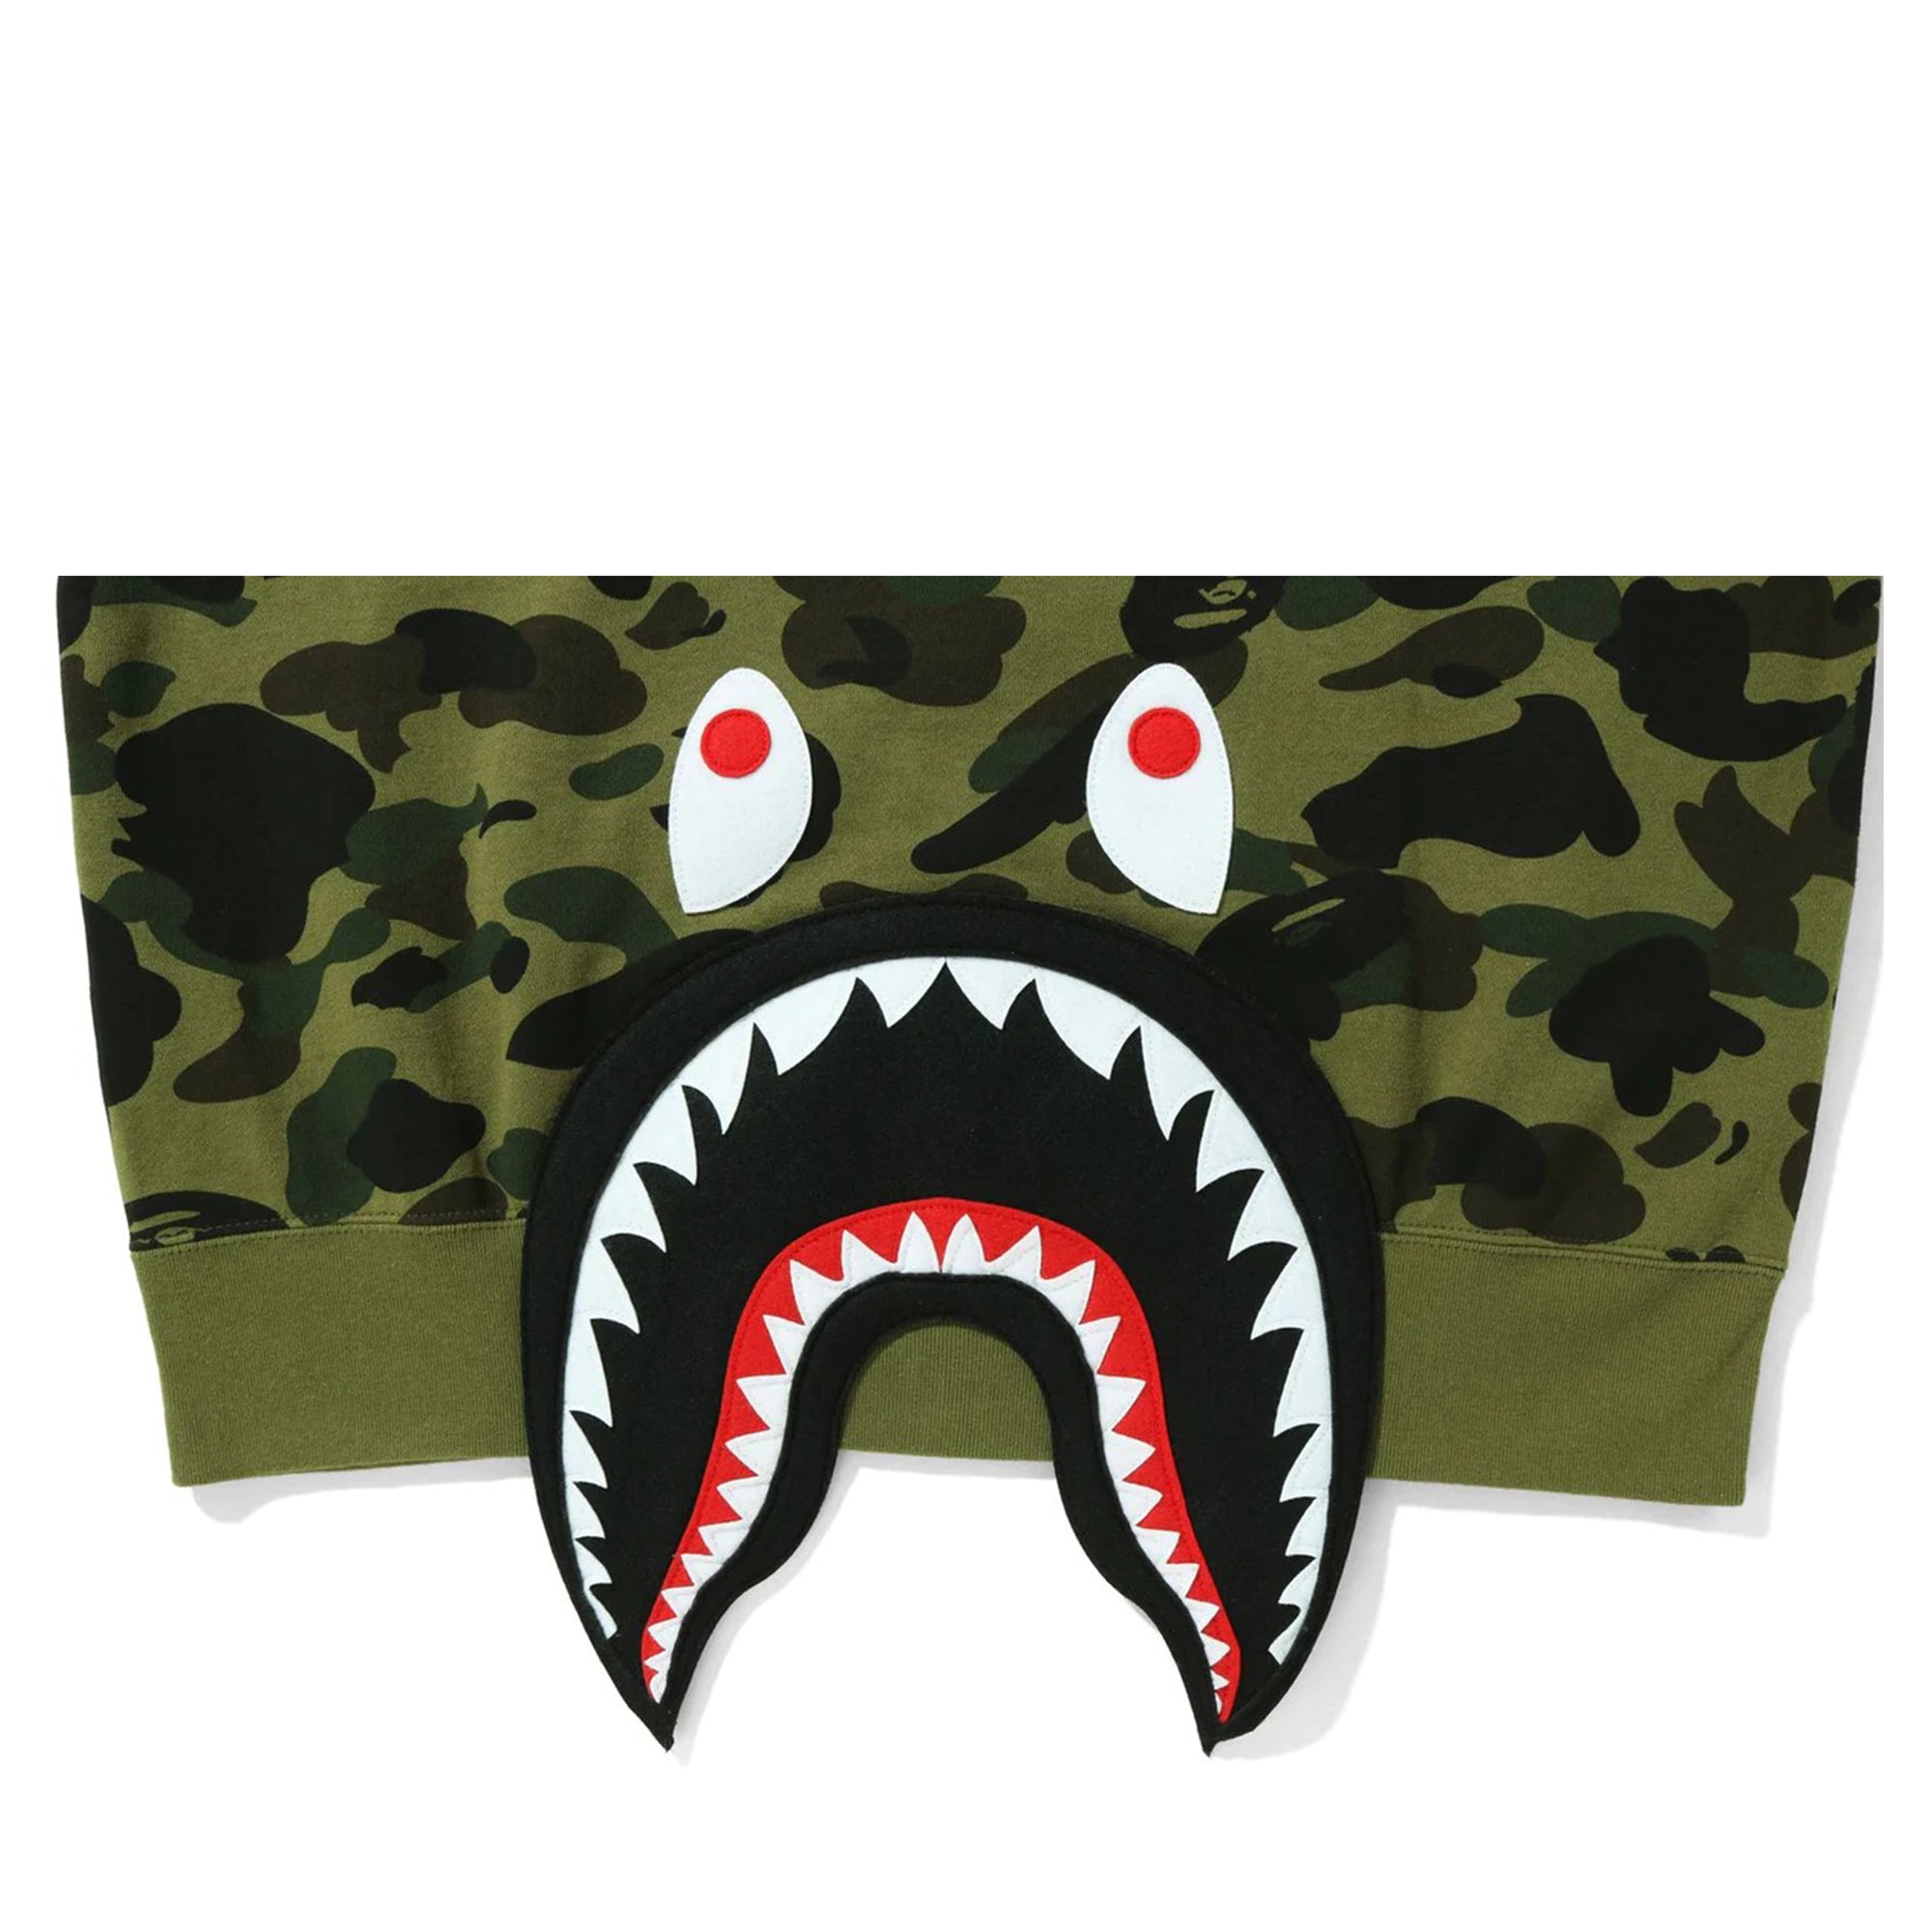 Bape 1st Camo Shark Relaxed Fit Hoodie Green-PLUS